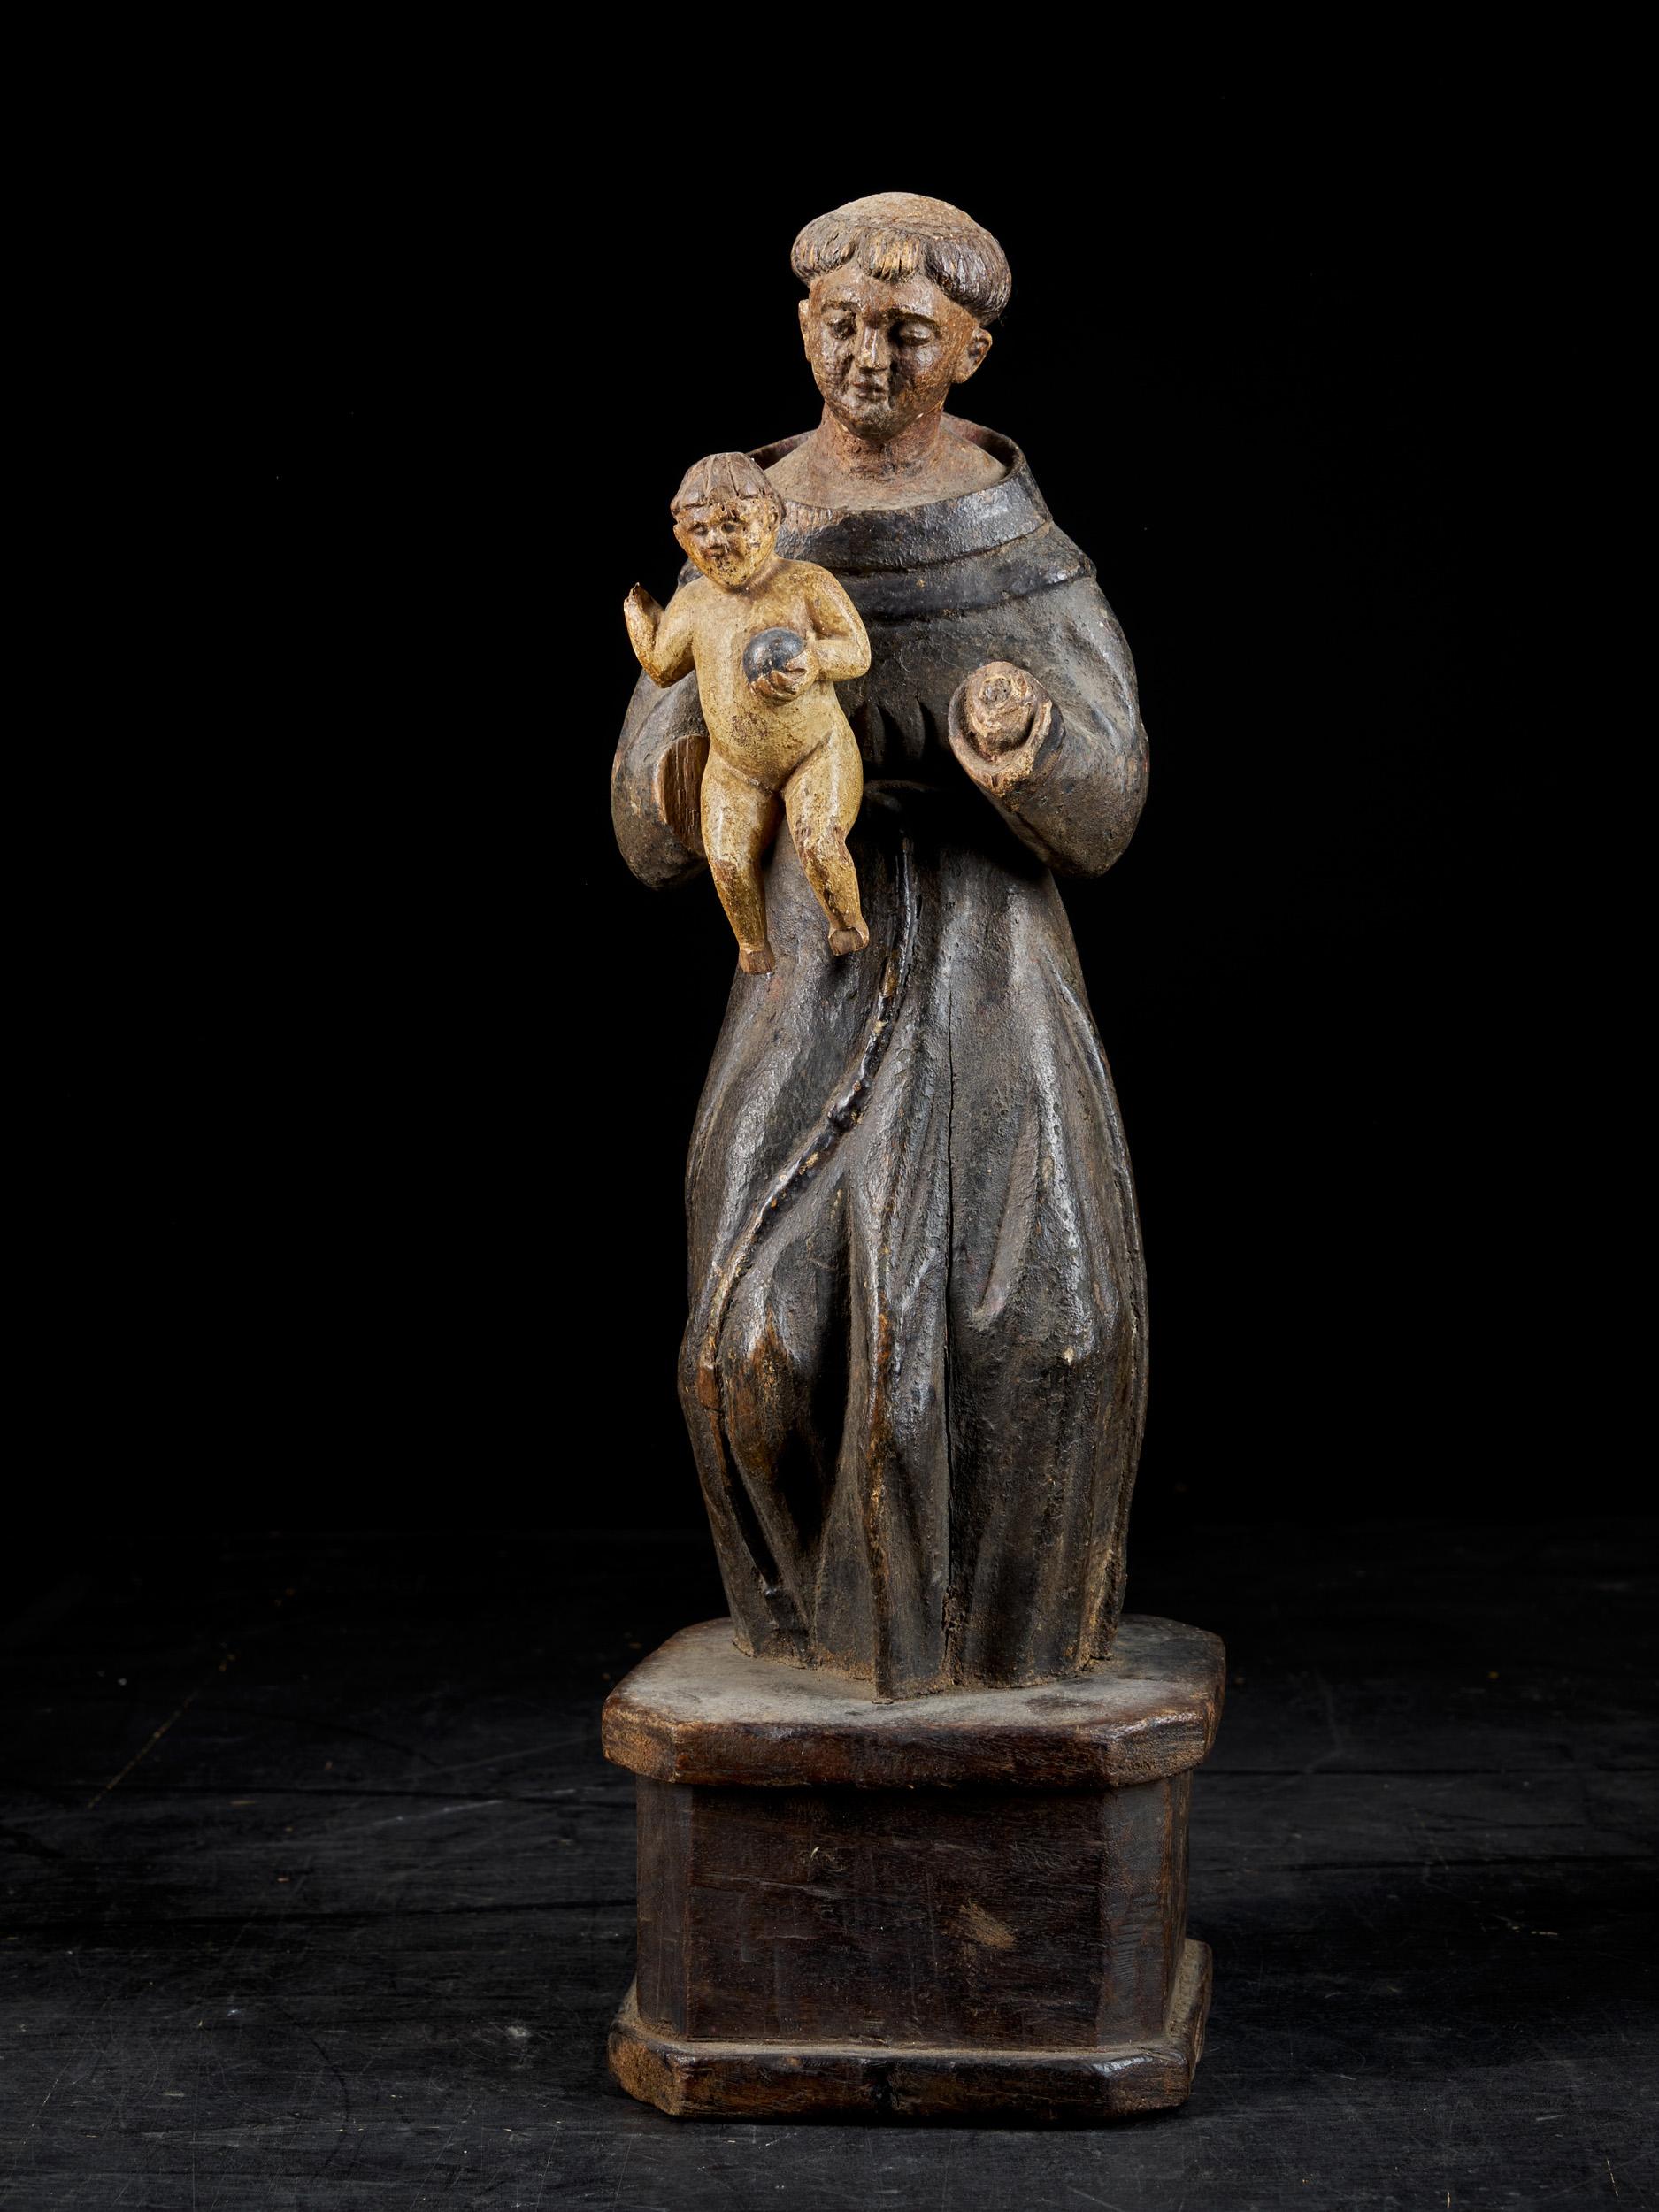 18th C., probably southern Europe, Wooden polychromed Sculpture of Saint Anthony - Art by Unknown